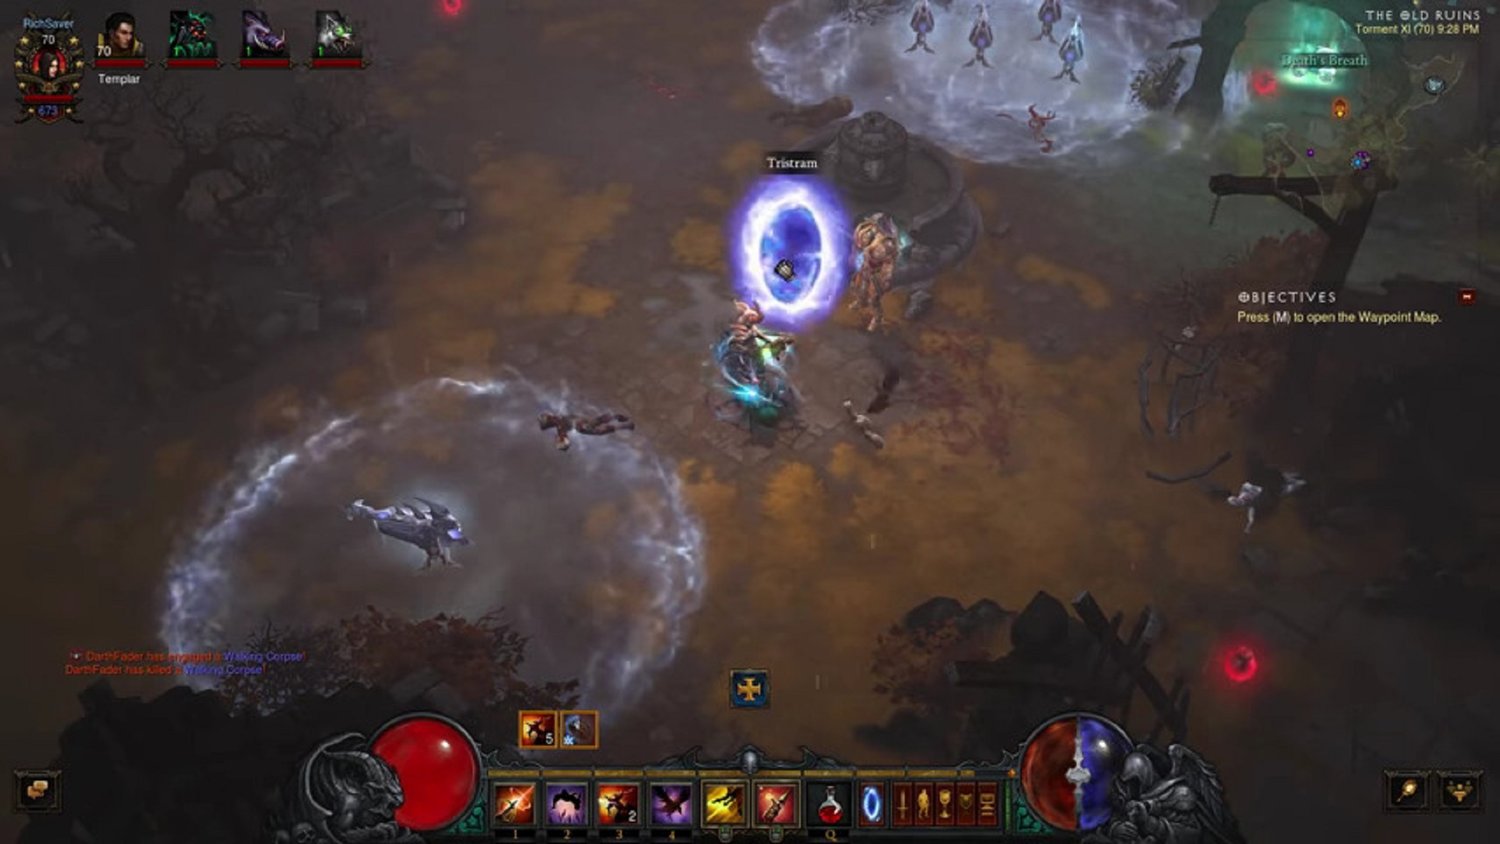 Video Hilariously Trashes Diablo 3 Expansion Gametyrant